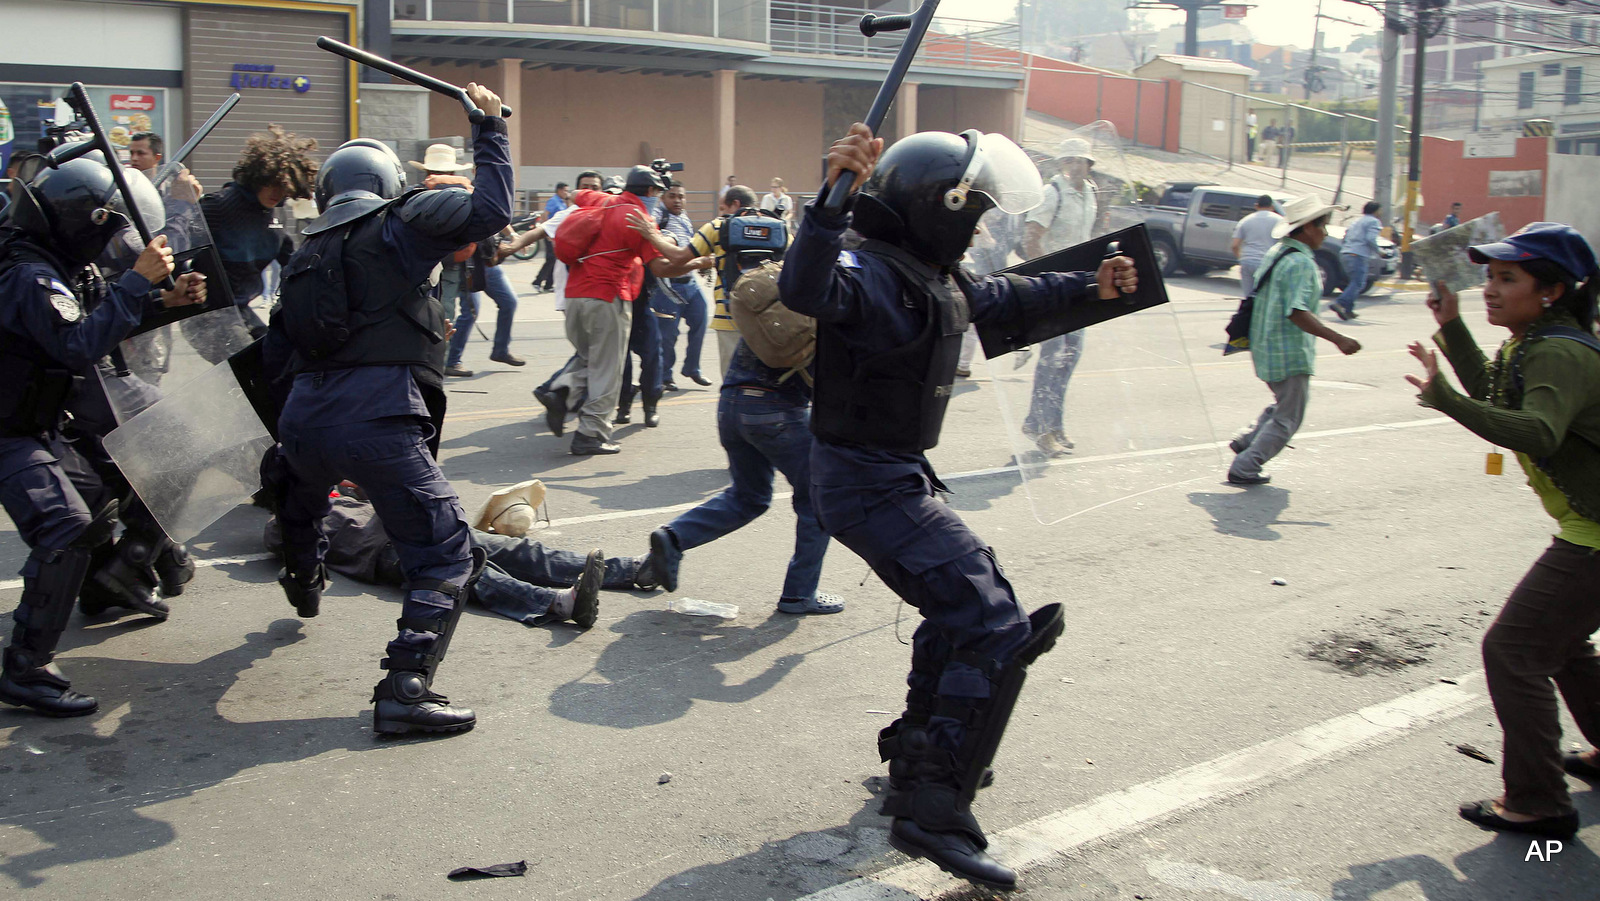 Police attack protesters outside the presidential office in Tegucigalpa, Honduras, Monday, May 9, 2016, after demonstrators tried to break past the security perimeter while demanding justice for the March murder of environmentalist and indigenous leader Berta Caceres. Honduras is one of the most violent countries on the planet by homicide statistics, and one of the most dangerous to be an environmental land activist, per capita, with 109 killed between 2010 and 2015 according to a Global Witness count.